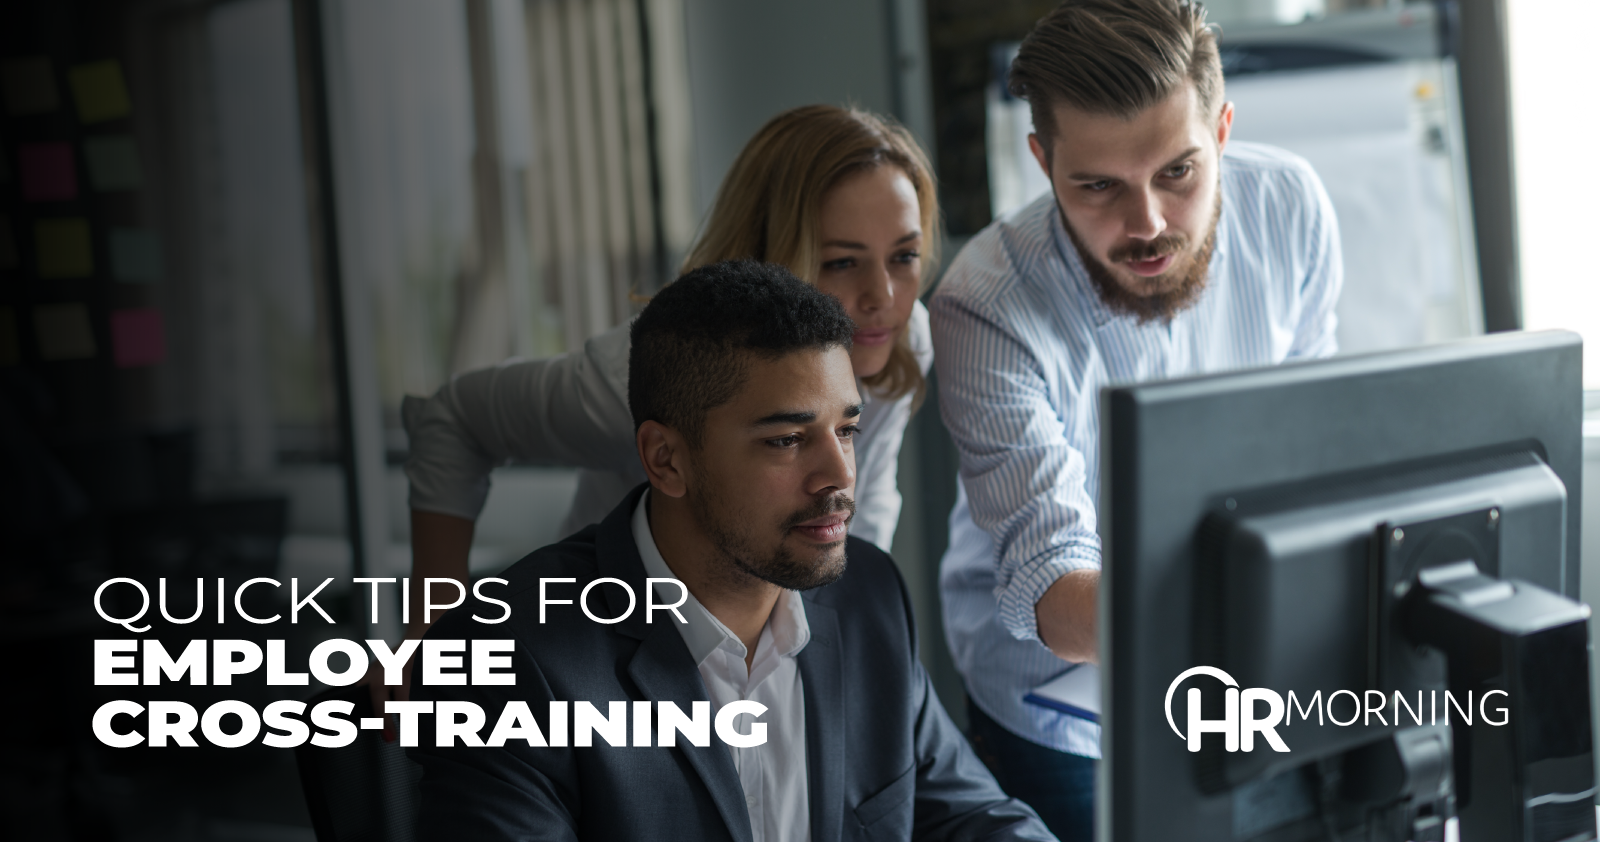 Quick tips for employee cross-training